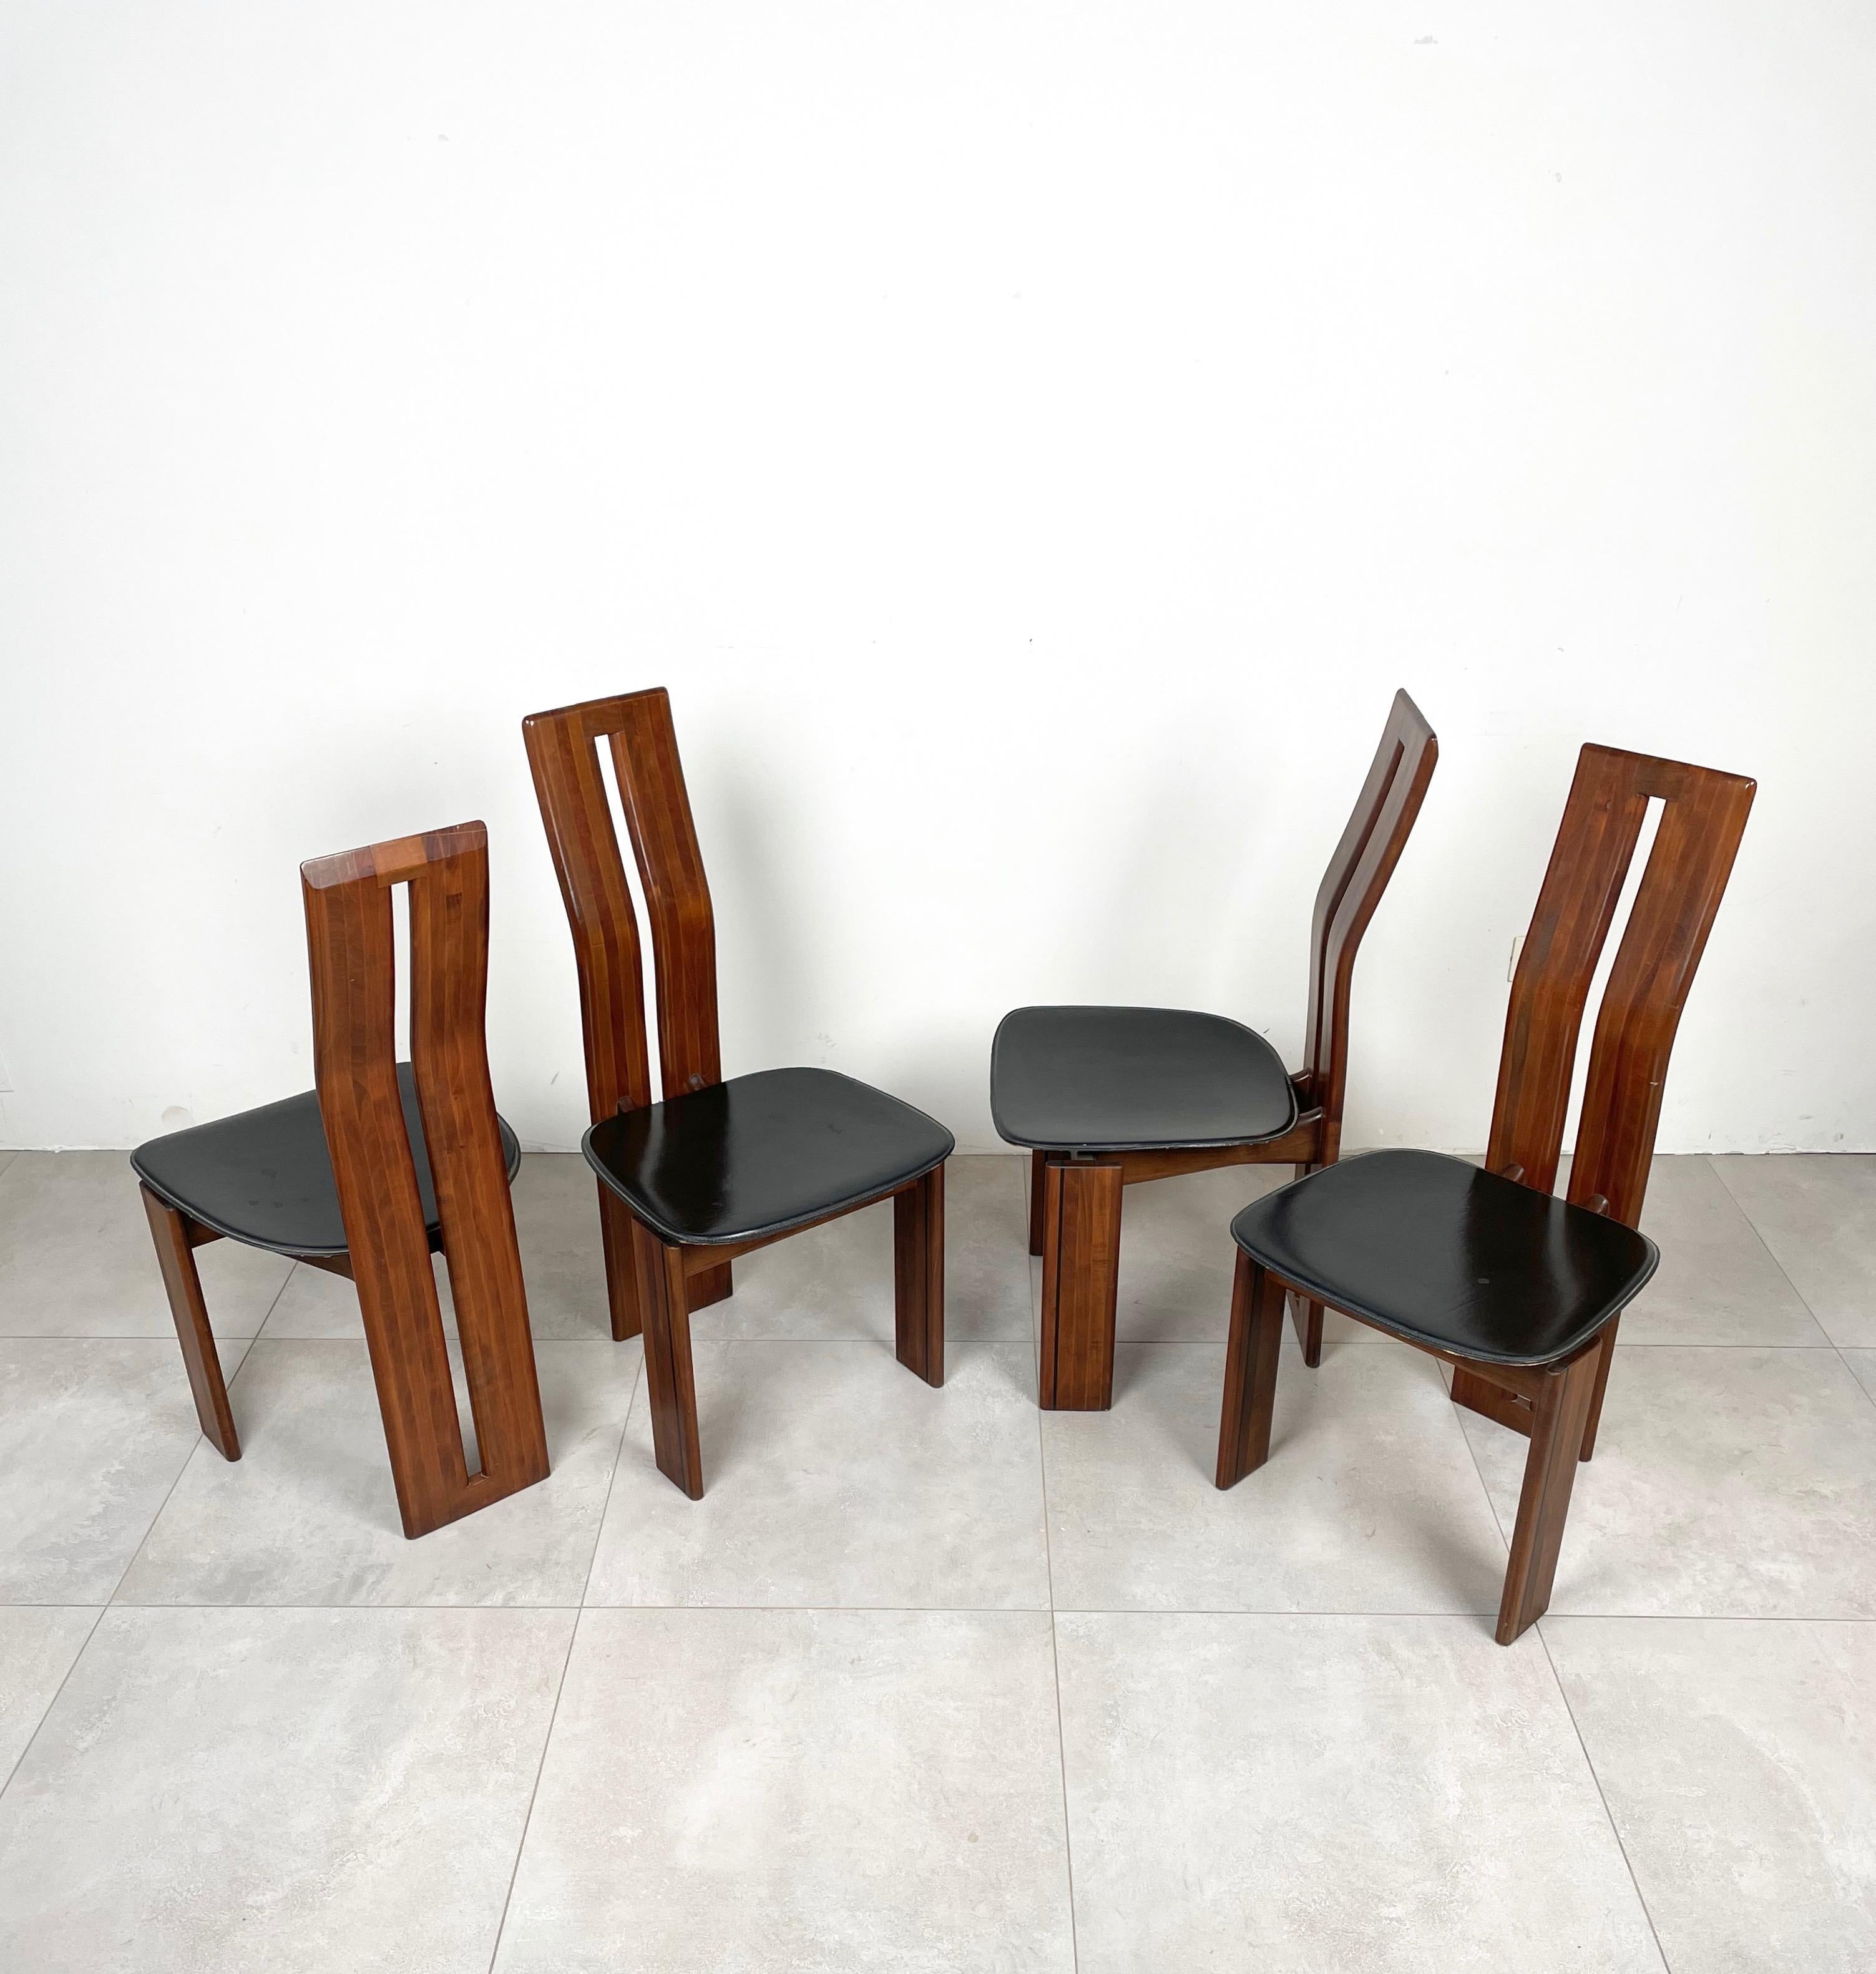 Set of Four Chairs Wood and Leather Mario Marenco for Mobil Girgi, Italy 1970s For Sale 3